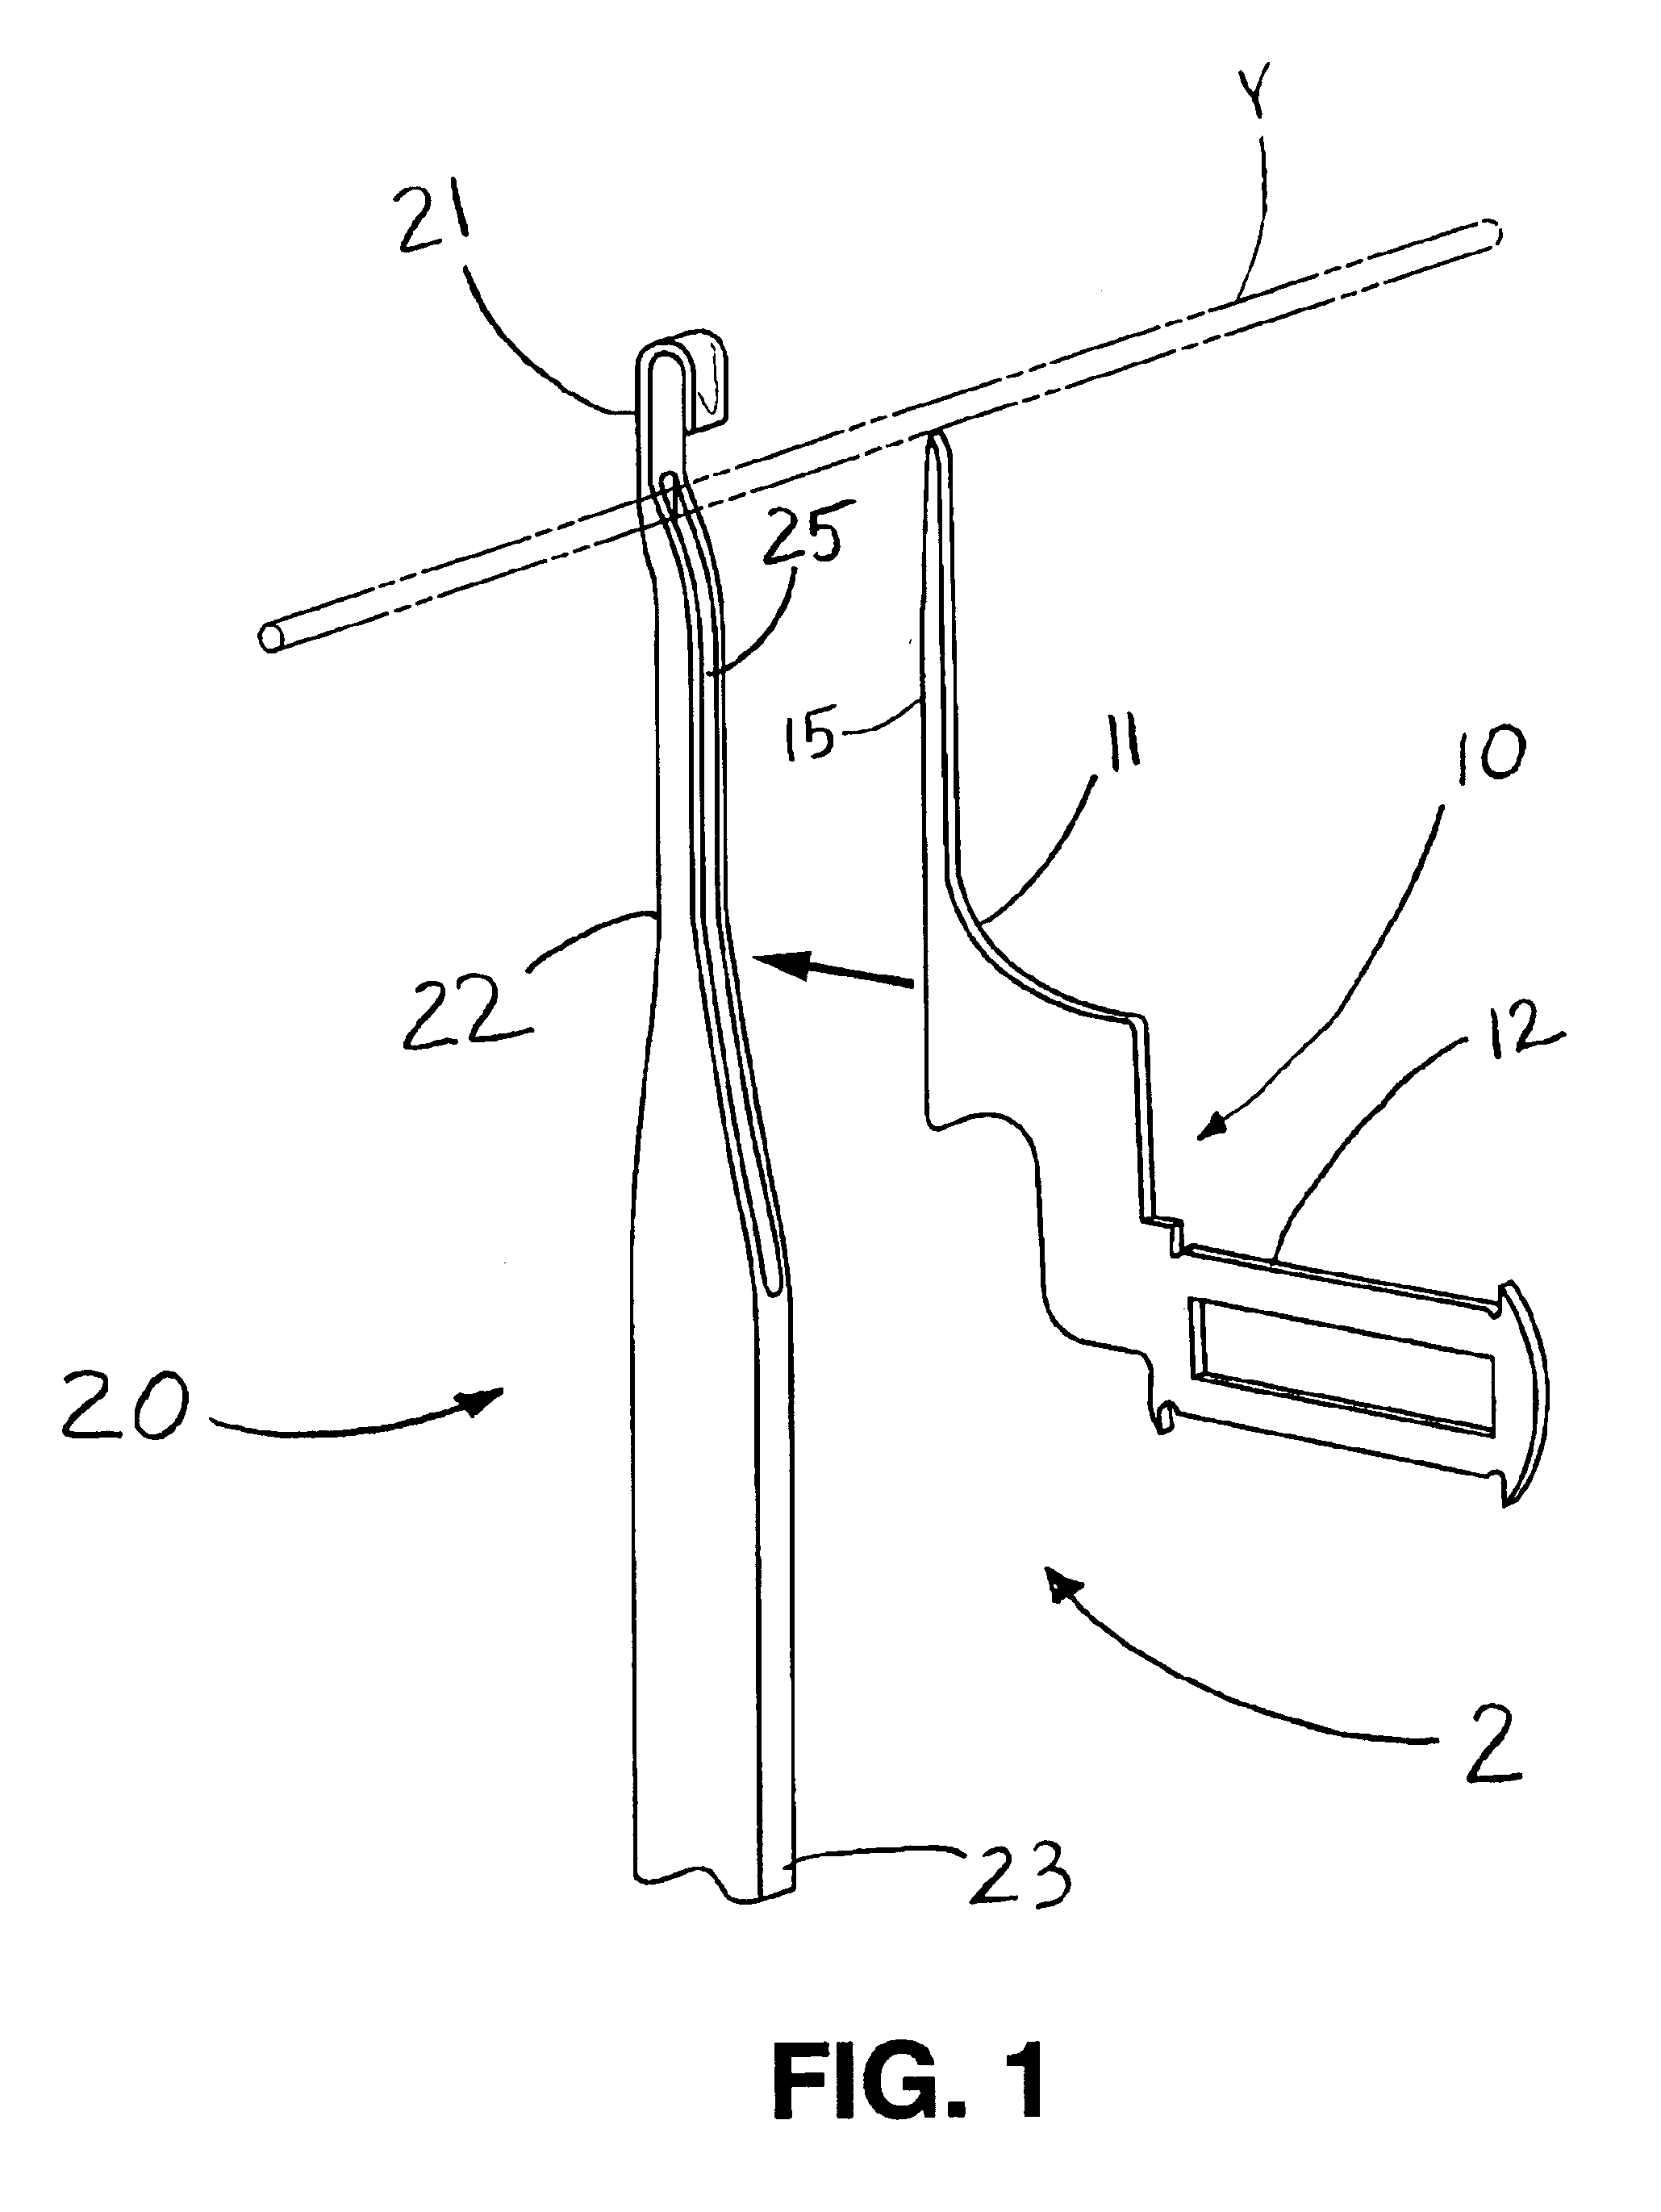 Closing element assembly for compound needles used in knitting machines